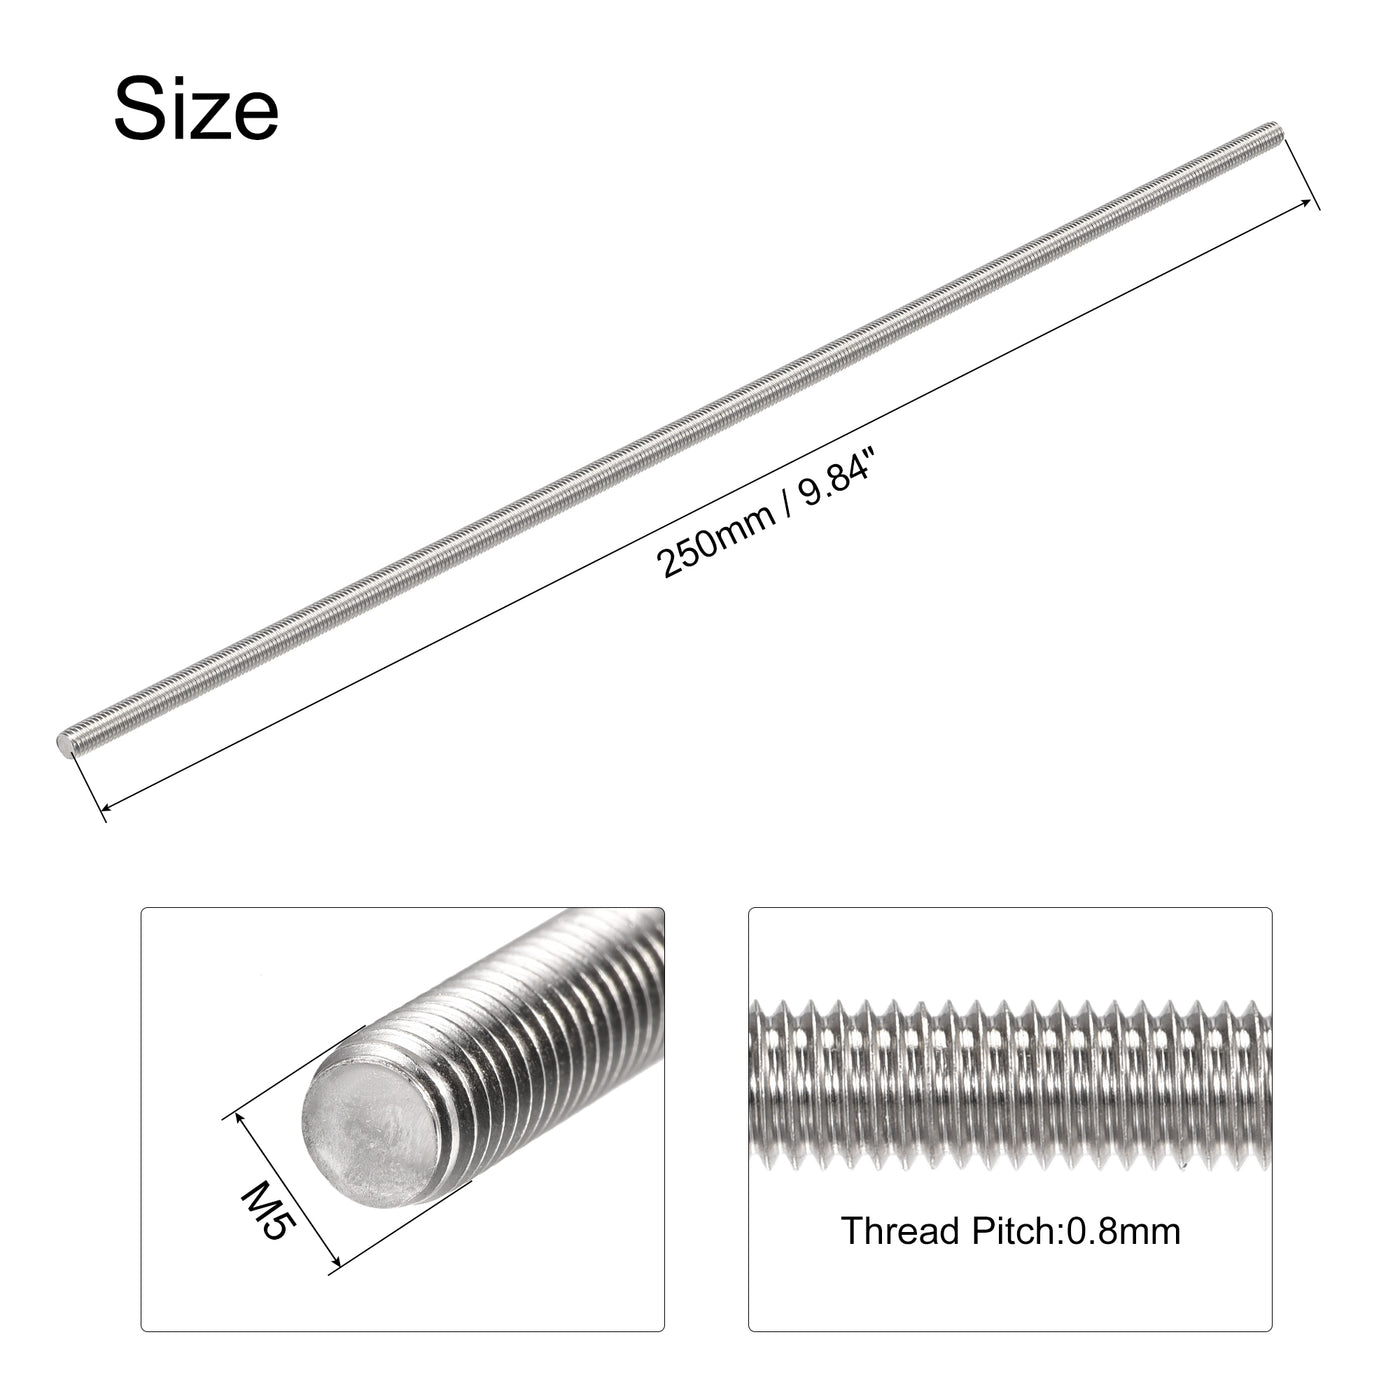 uxcell Uxcell 4pcs M5 x 250mm Fully Threaded Rod 304 Stainless Steel Right Hand Threads